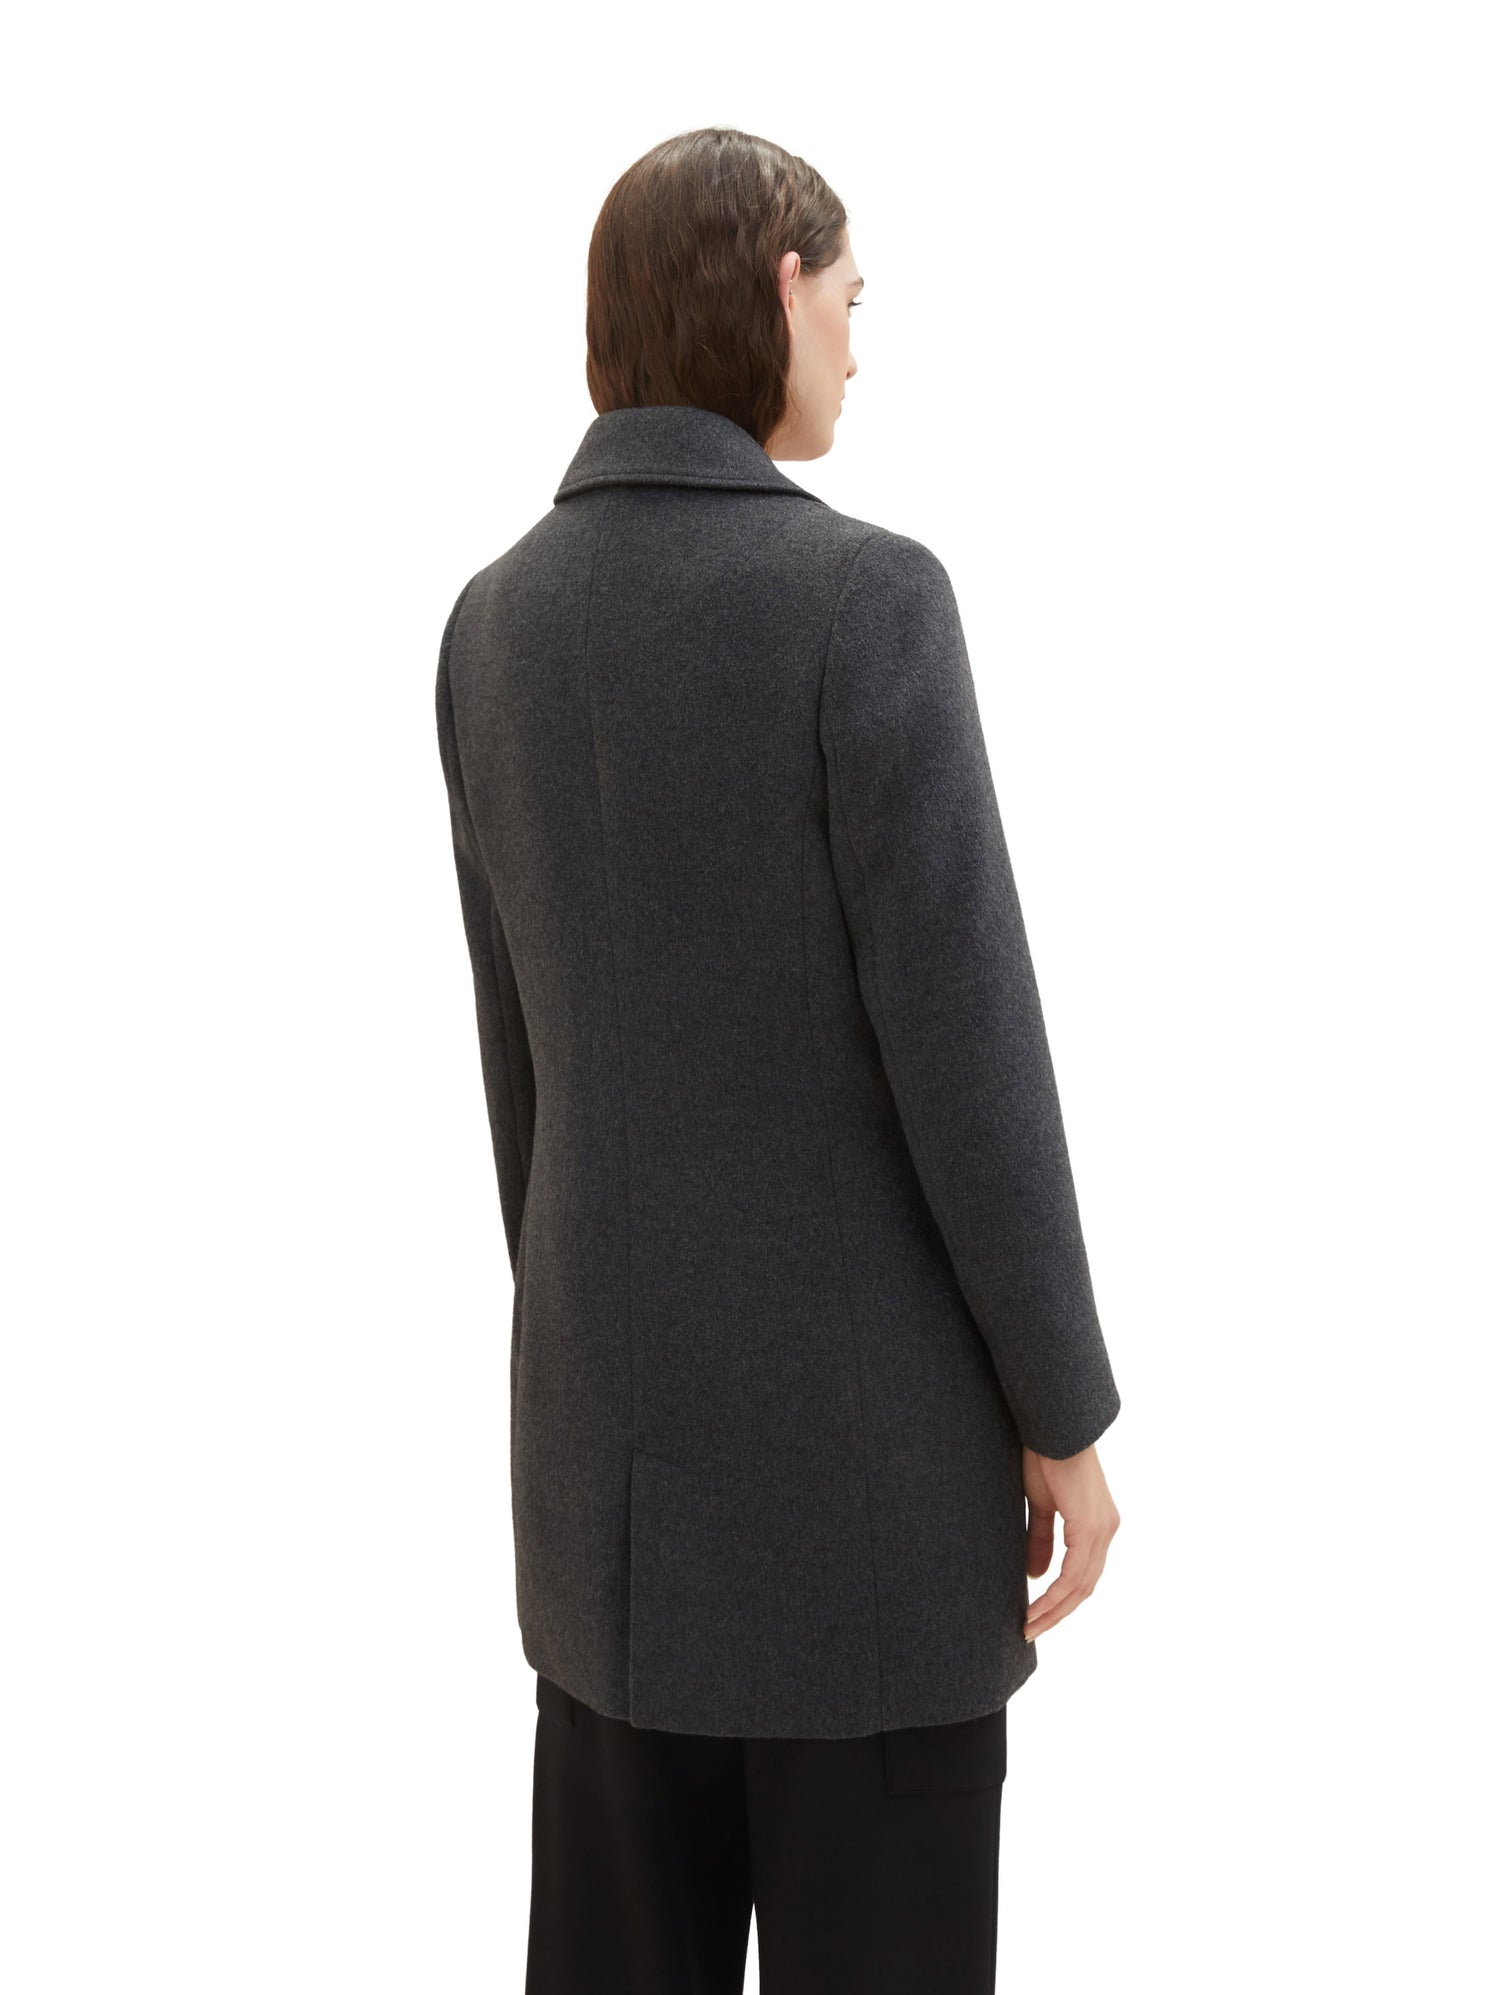 Fitted Coat_1038685_10522_05